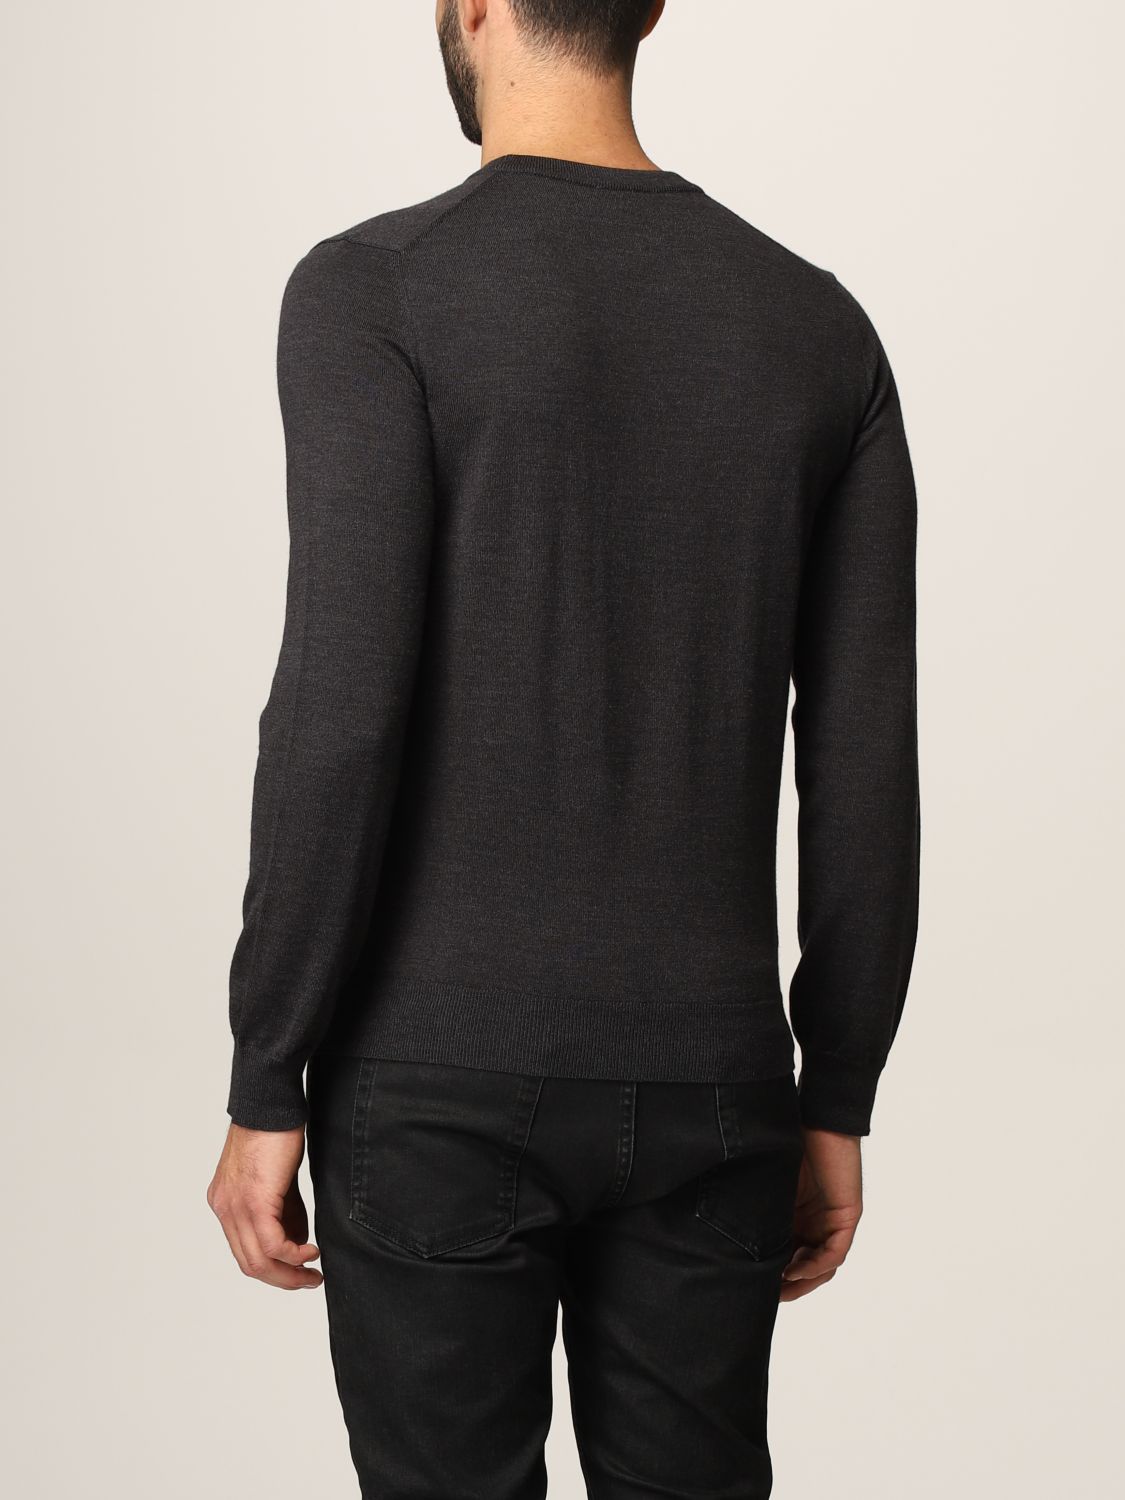 LACOSTE: sweater for man - Grey | Lacoste sweater AH1969 online on ...